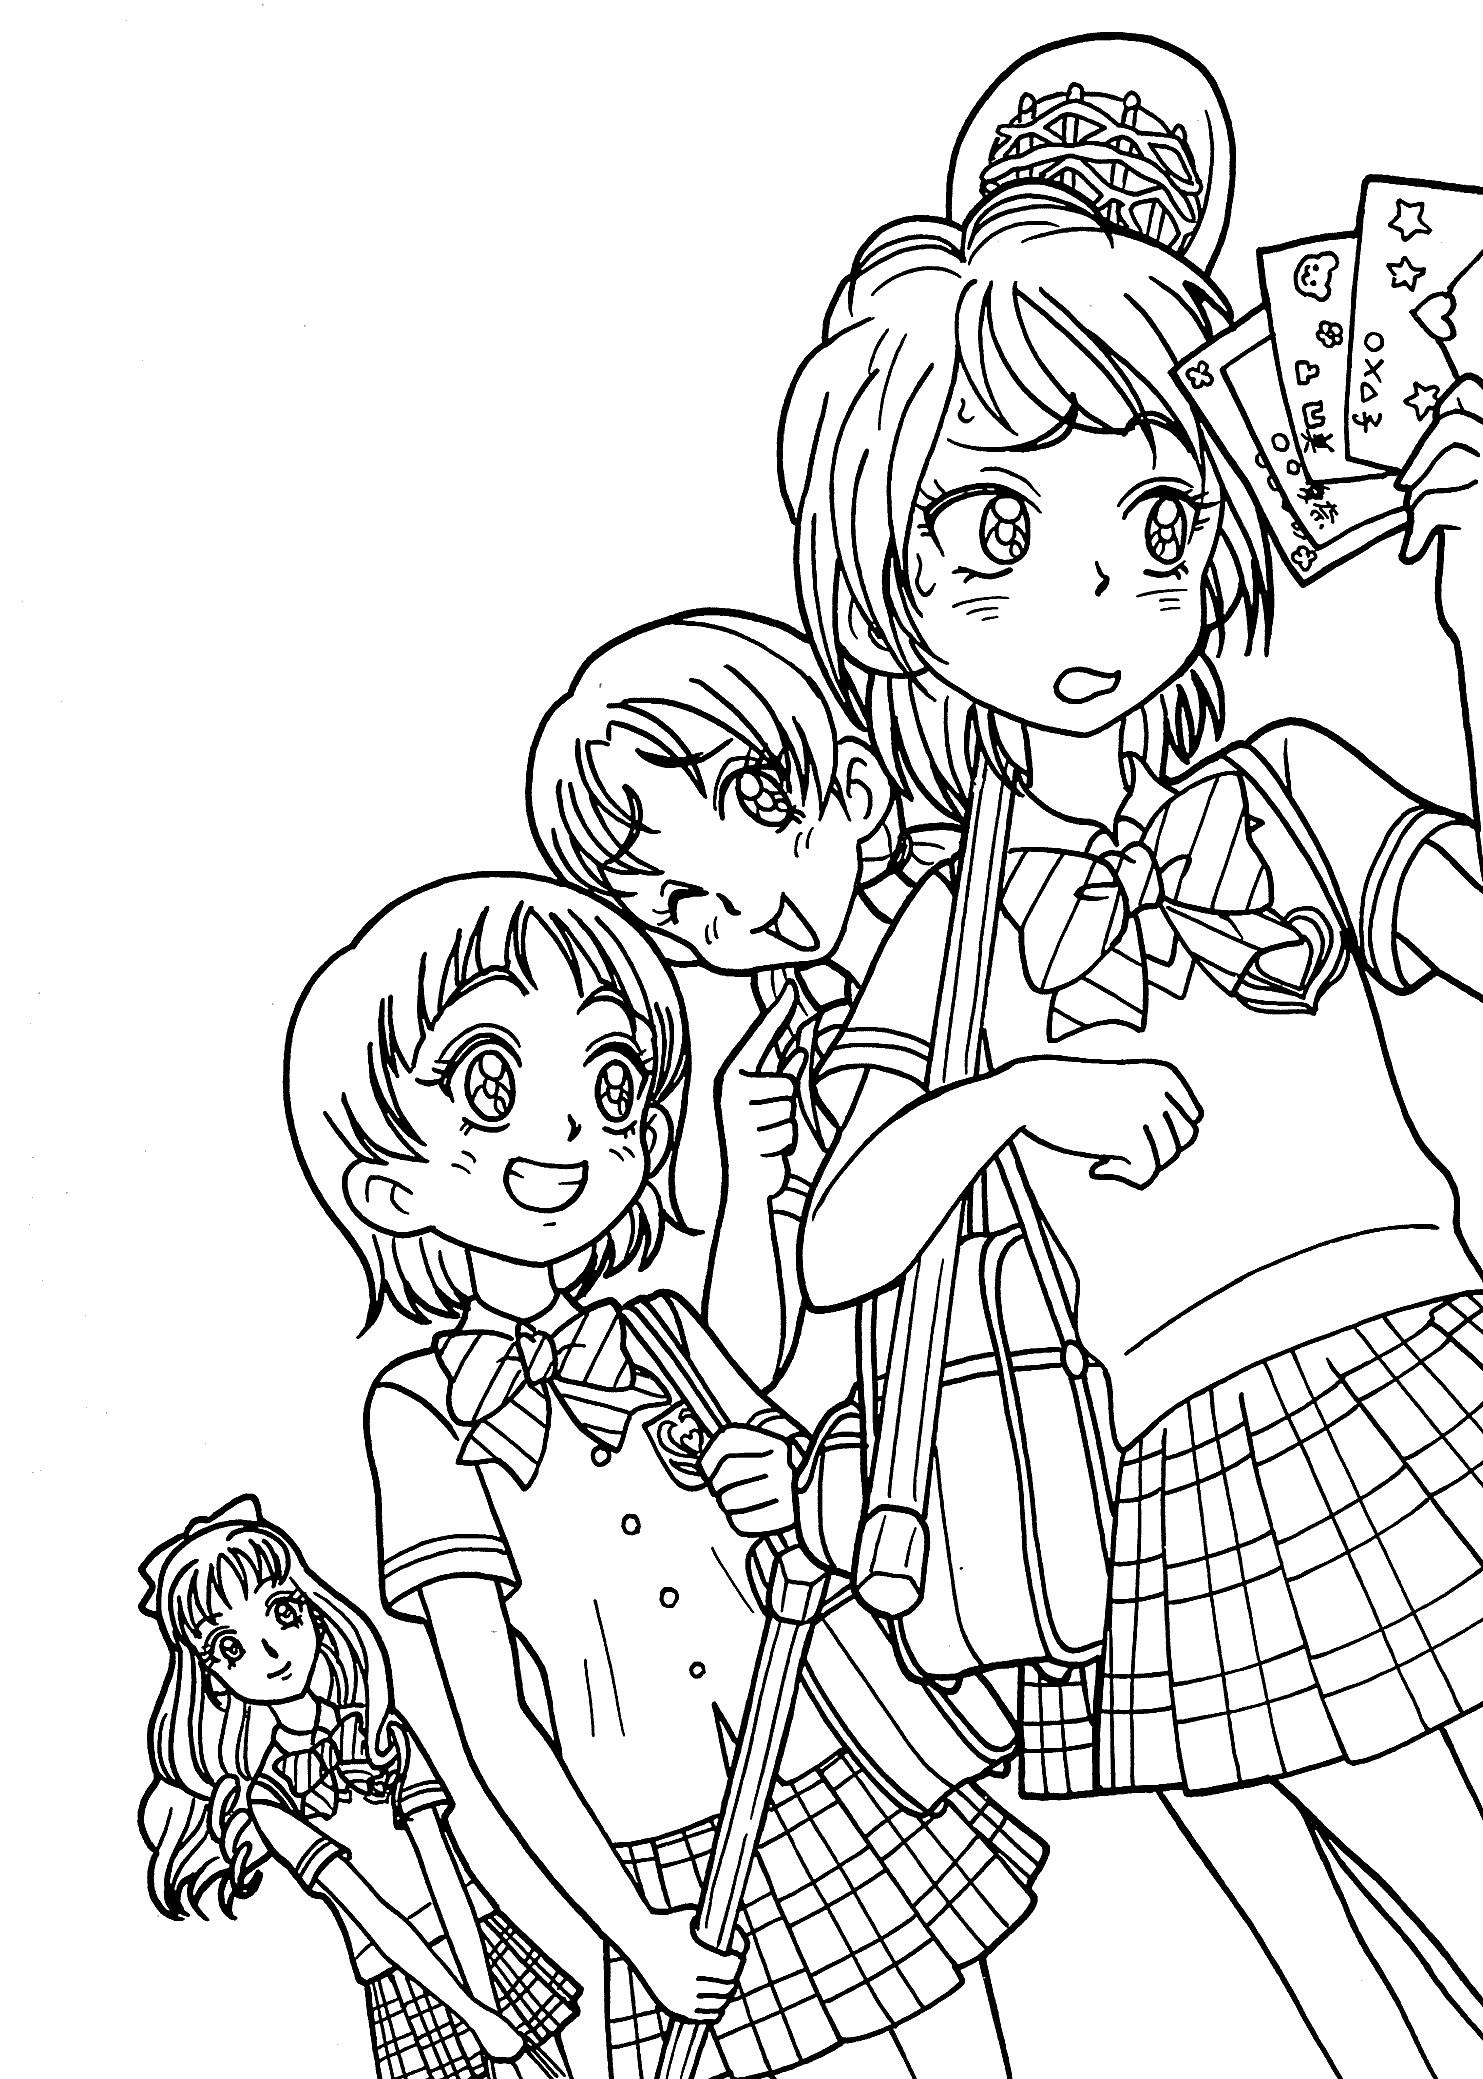 Anime Group Of Boys Coloring Pages
 Anime Girls Group Coloring Page Coloring Home